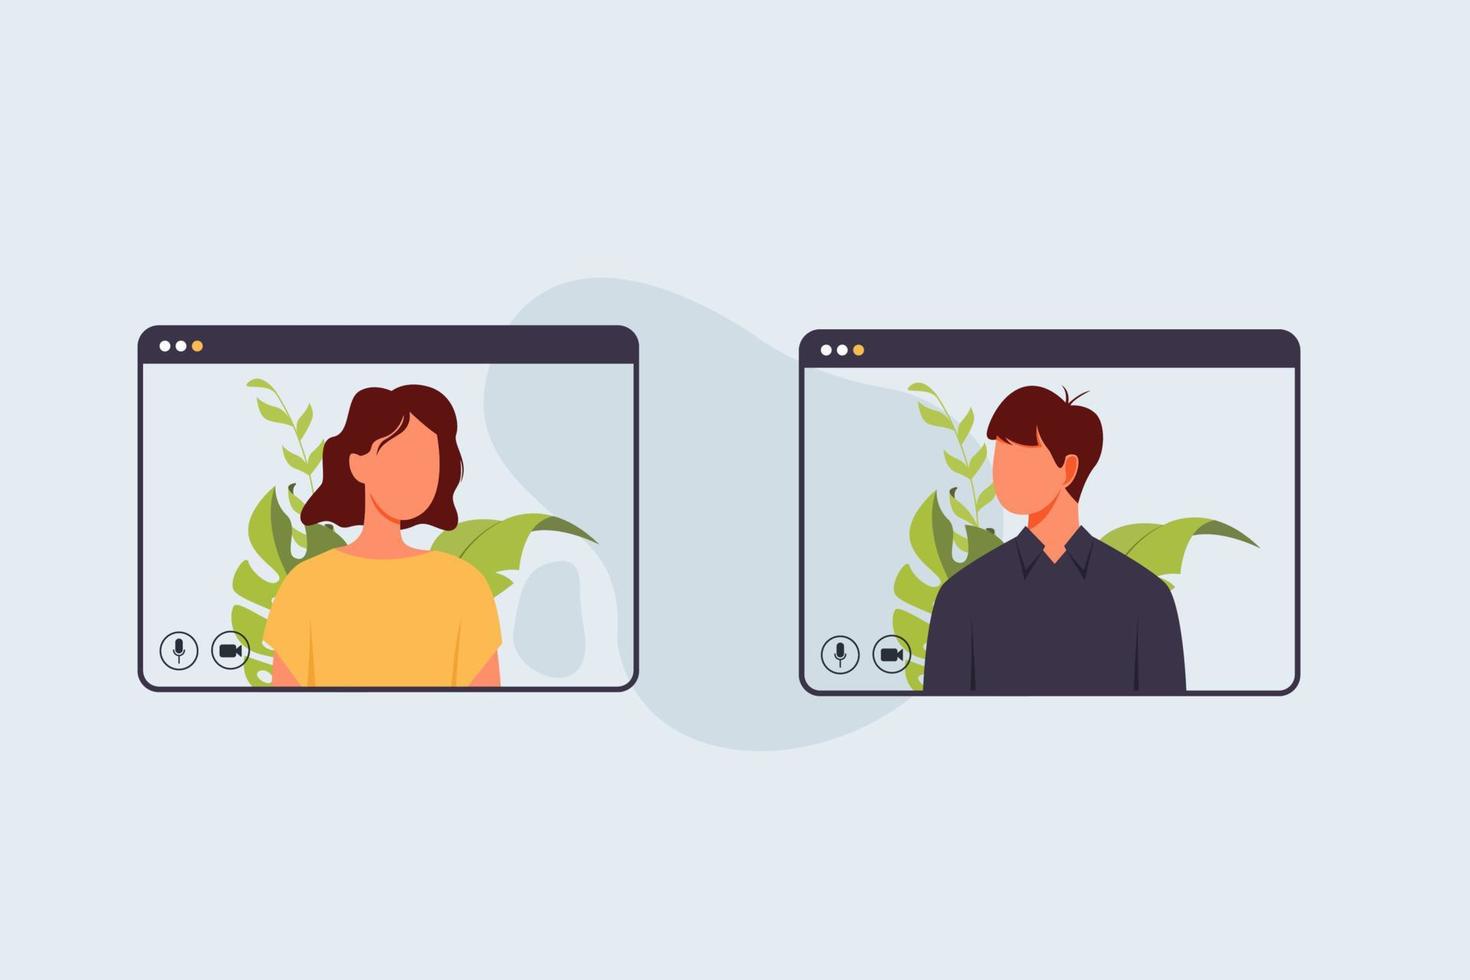 Video call conference, working from home, social distancing, business discussion vector